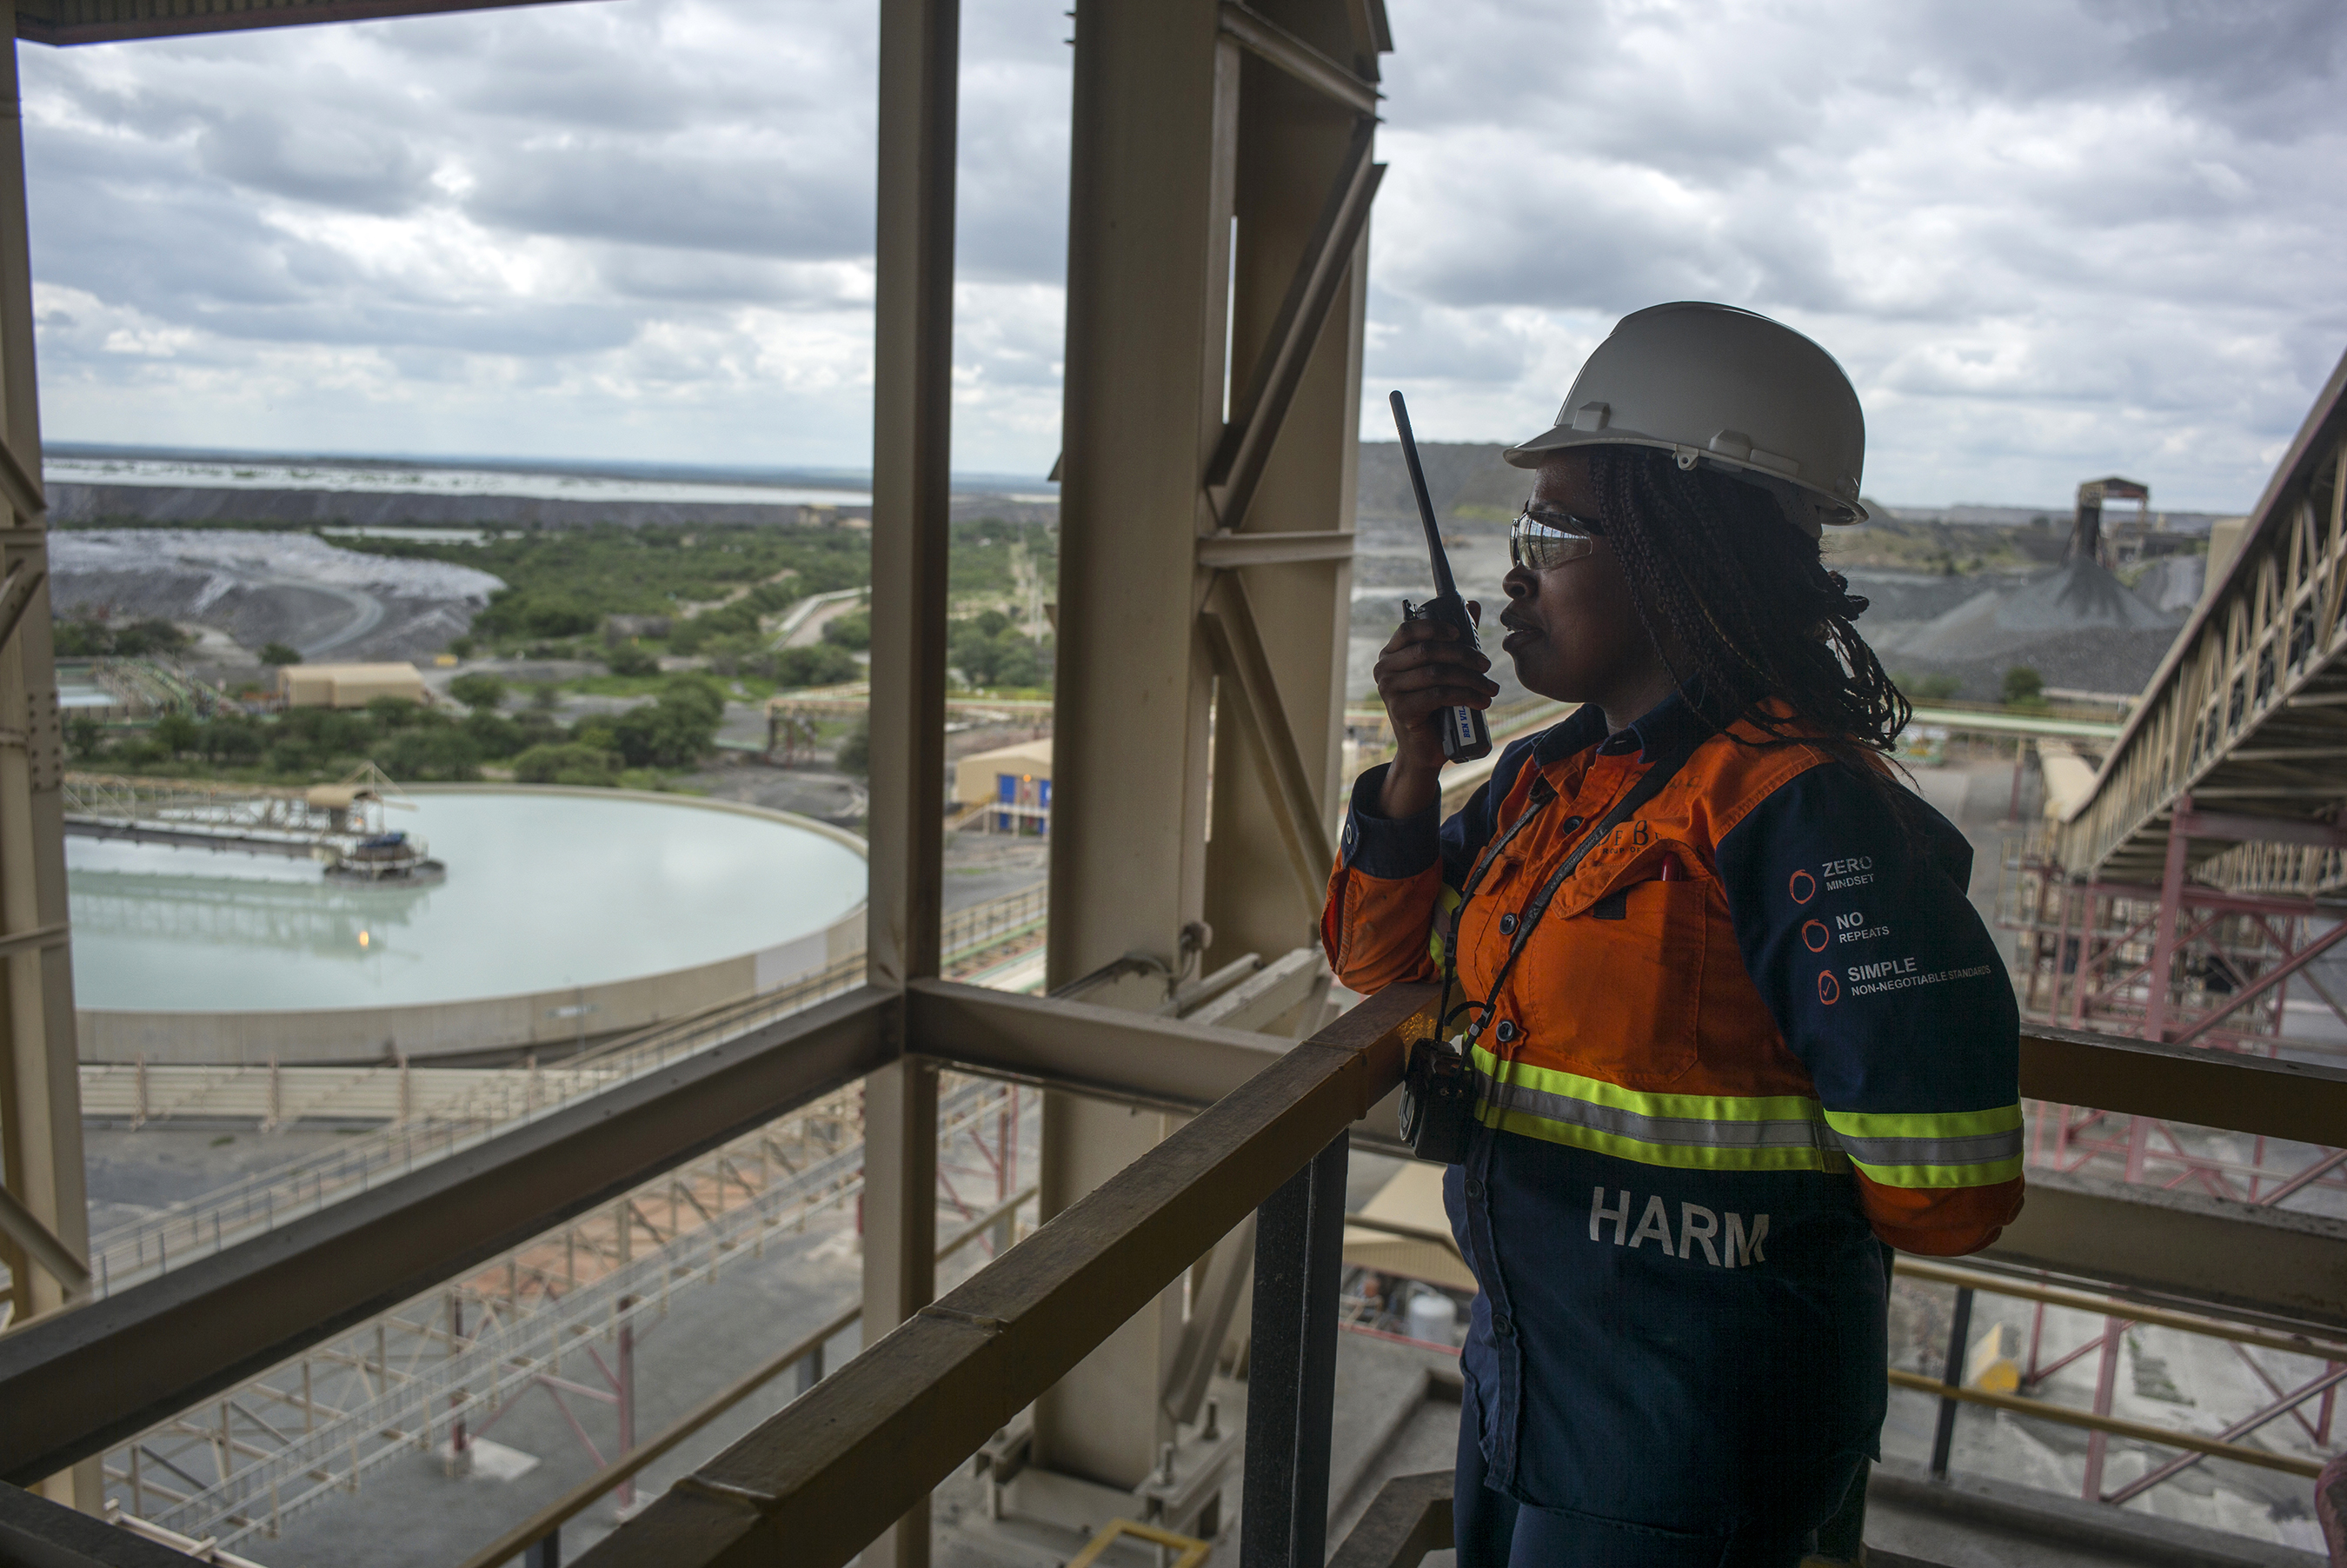 Women play an important role in the mining industry, like at the De Beers South Africa Mine.